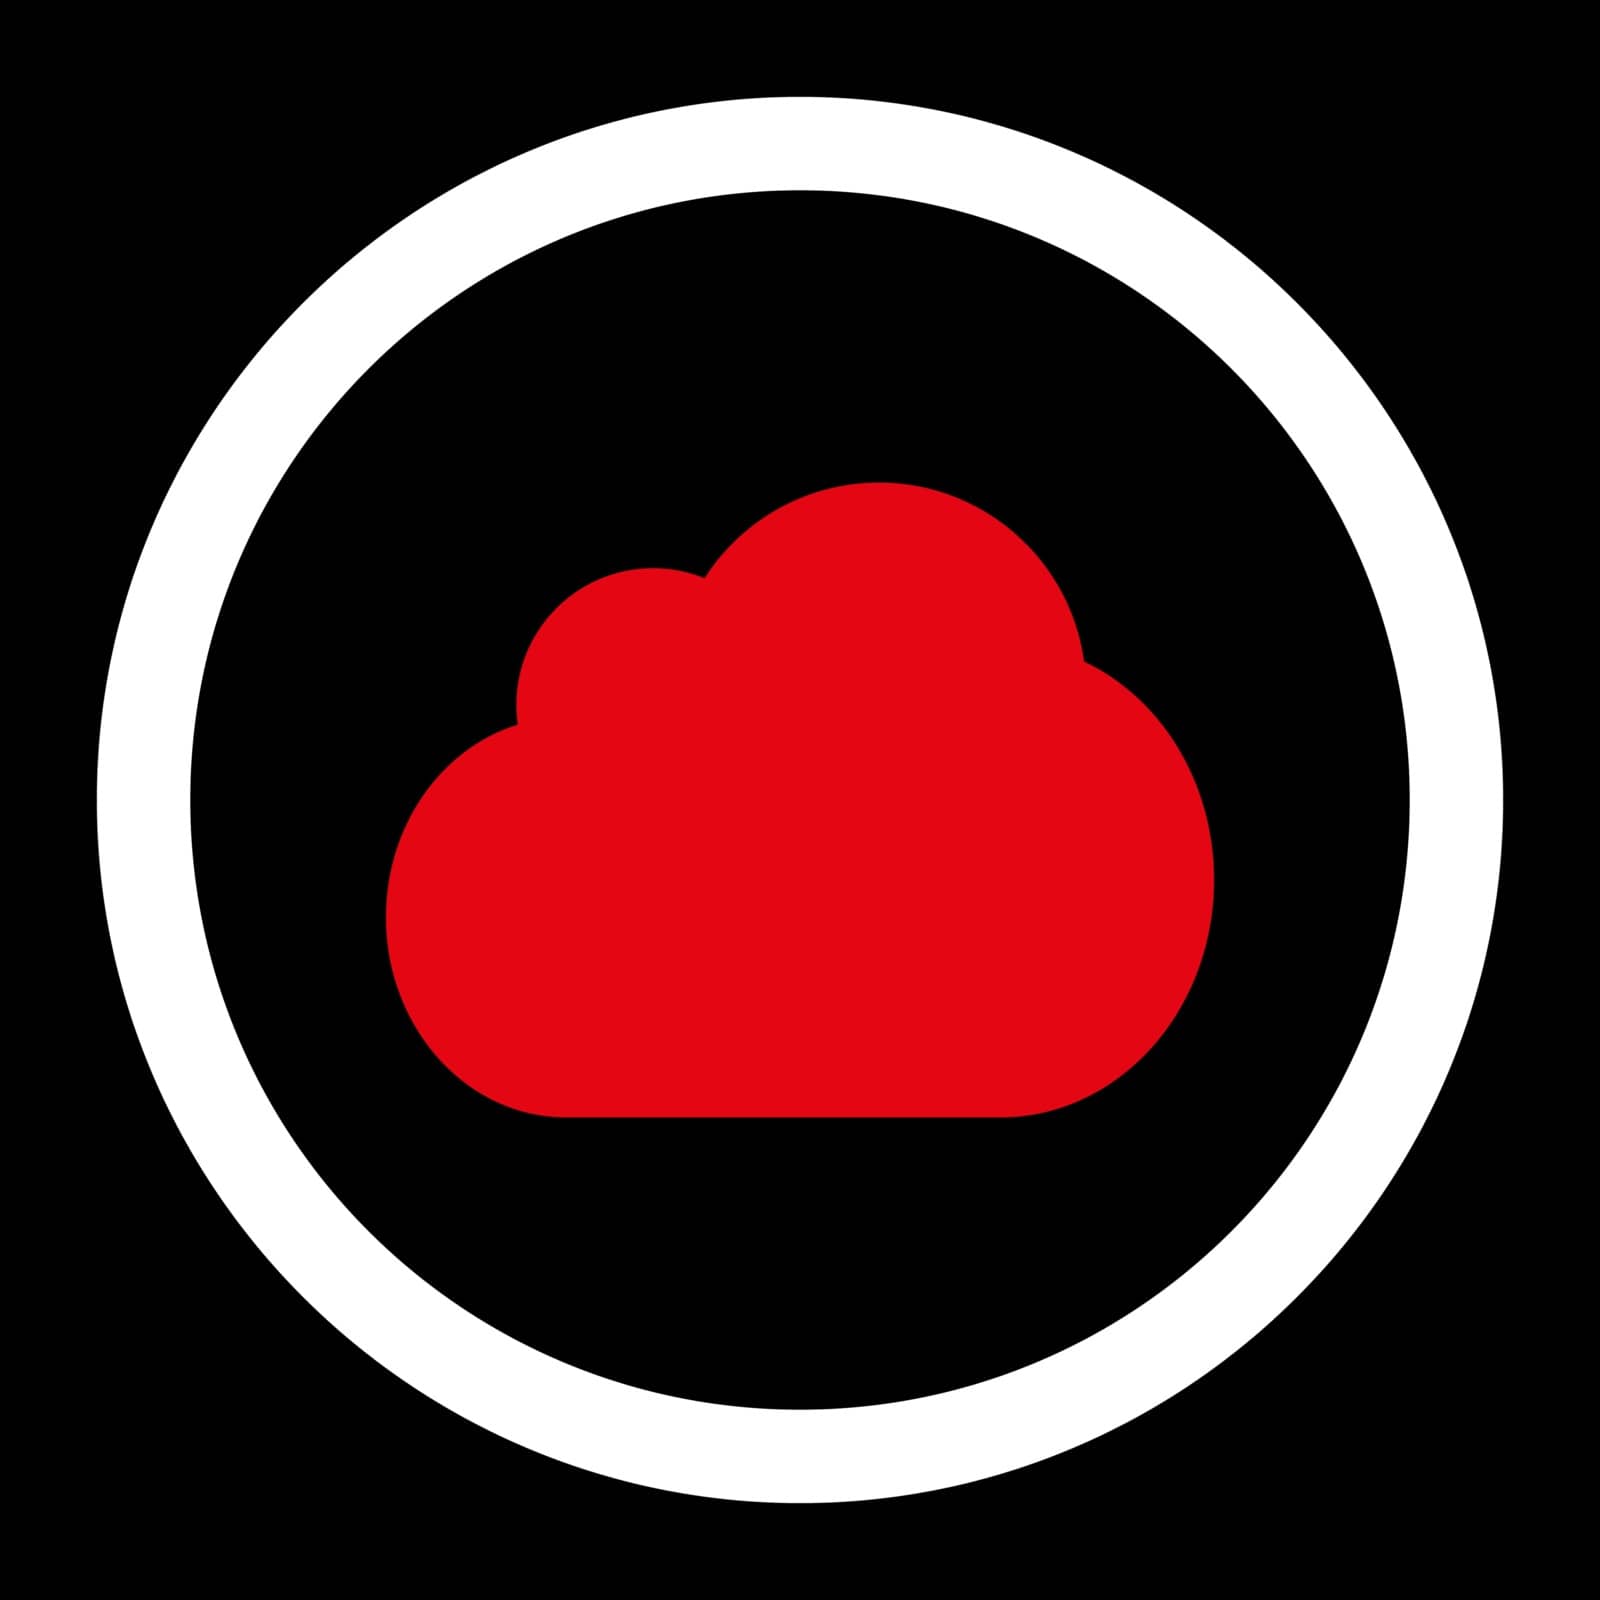 Cloud vector icon. This rounded flat symbol is drawn with red and white colors on a black background.